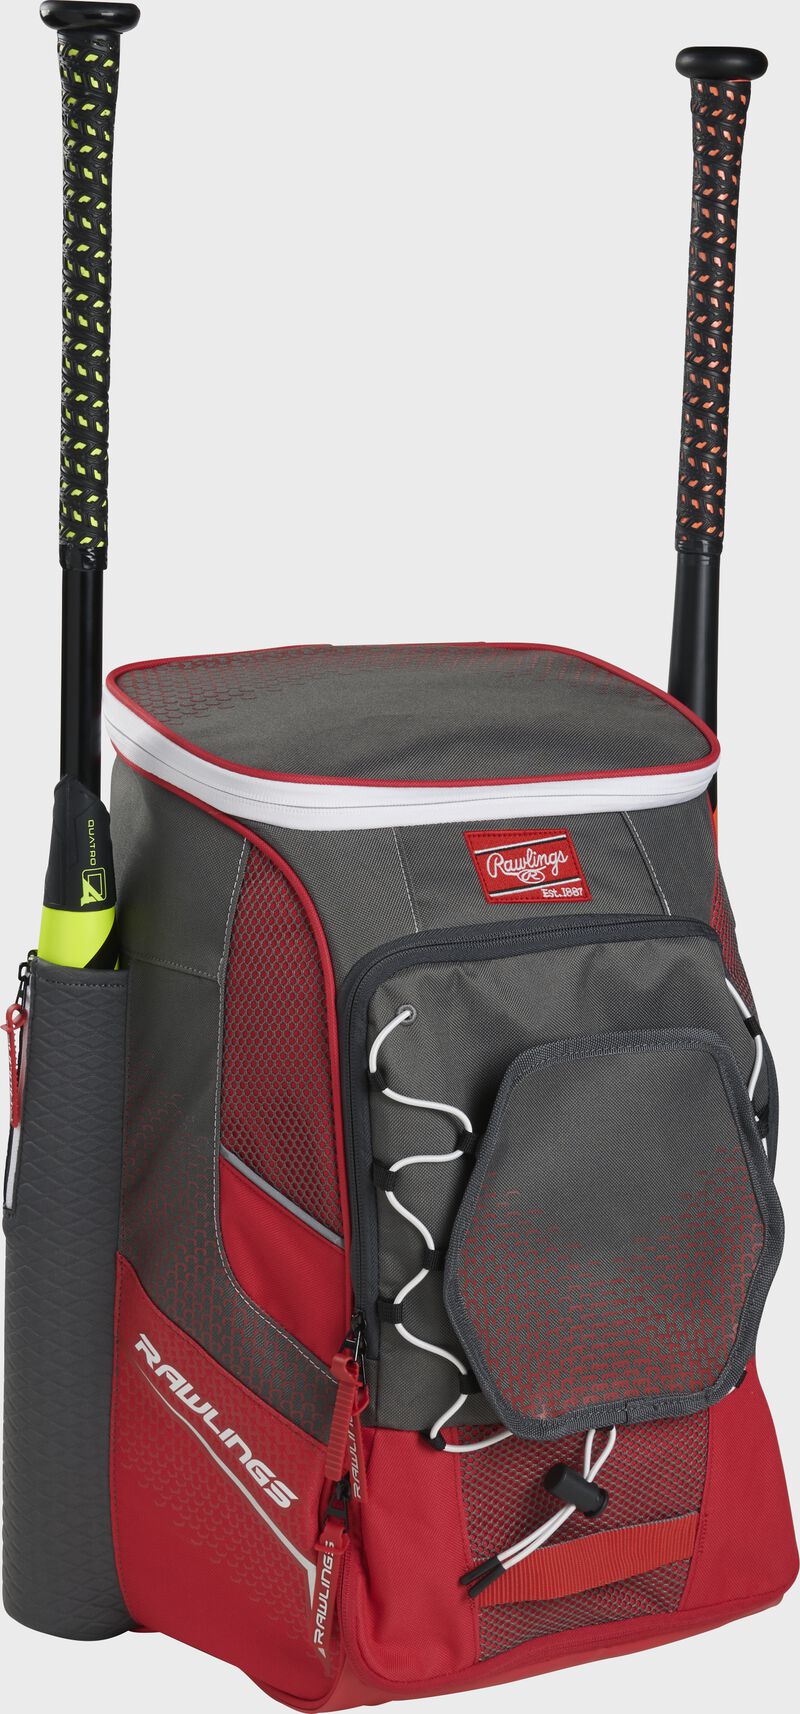 Front left angle of a scarlet Rawlings Impulse baseball gear backpack with two bats - SKU: IMPLSE-S image number null